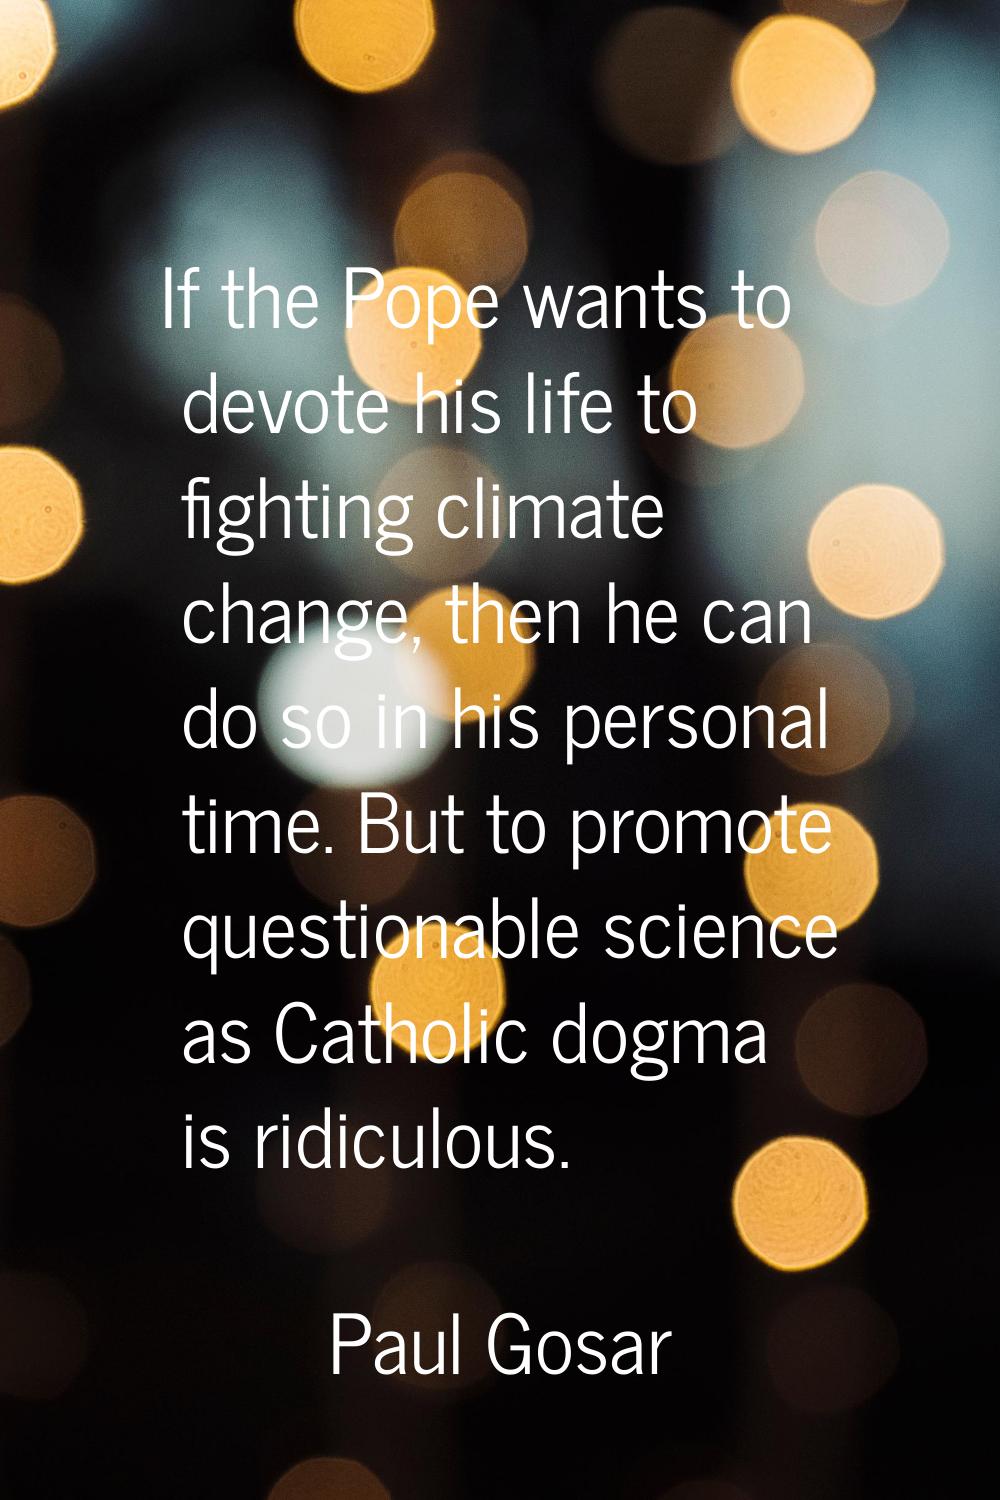 If the Pope wants to devote his life to fighting climate change, then he can do so in his personal 